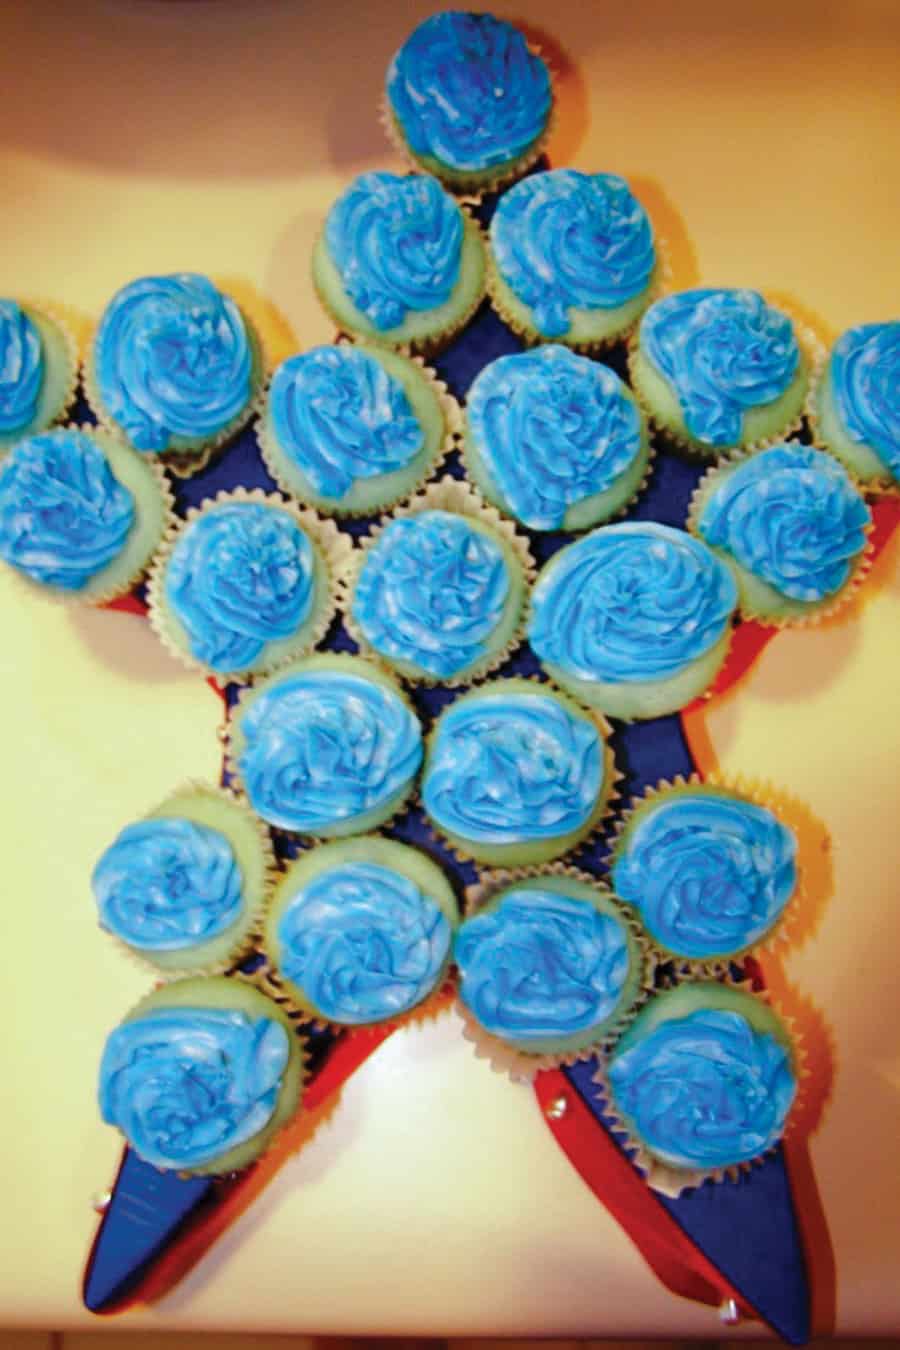 cupcakes arranged in a star shape with blue frosting